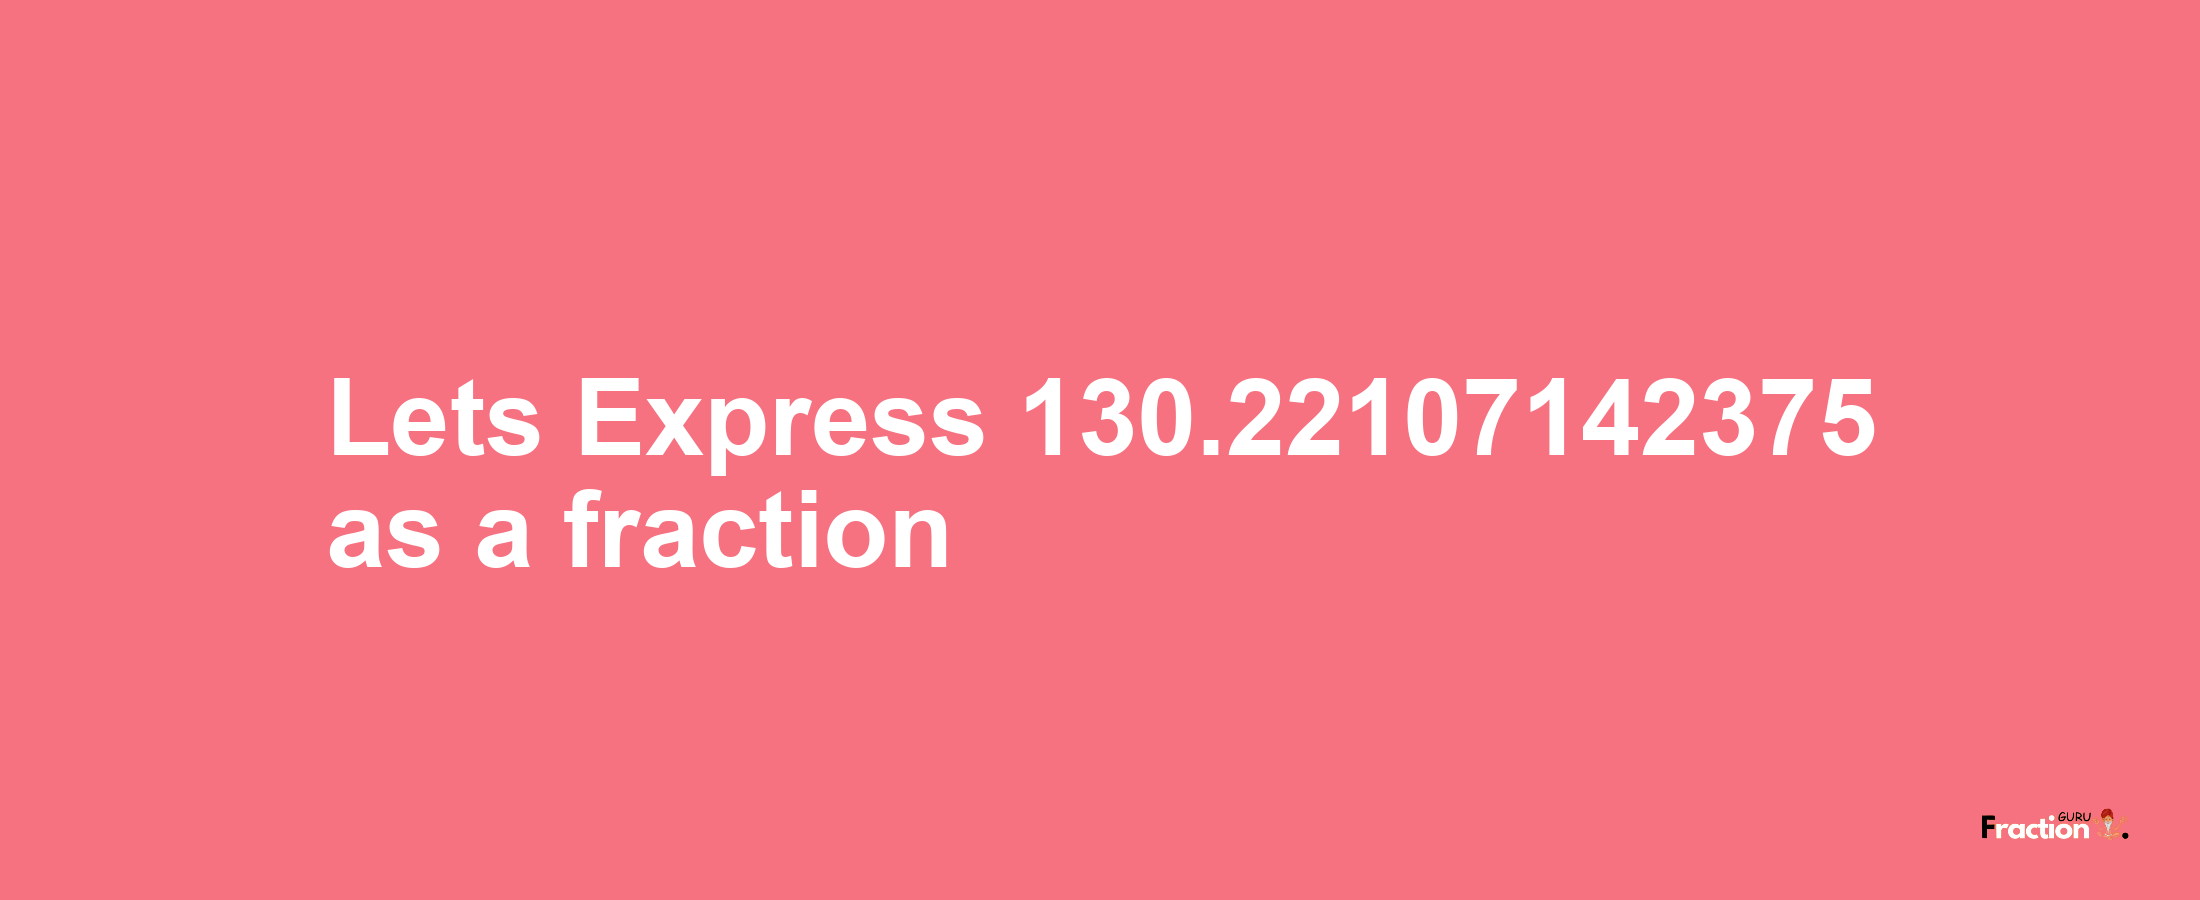 Lets Express 130.22107142375 as afraction